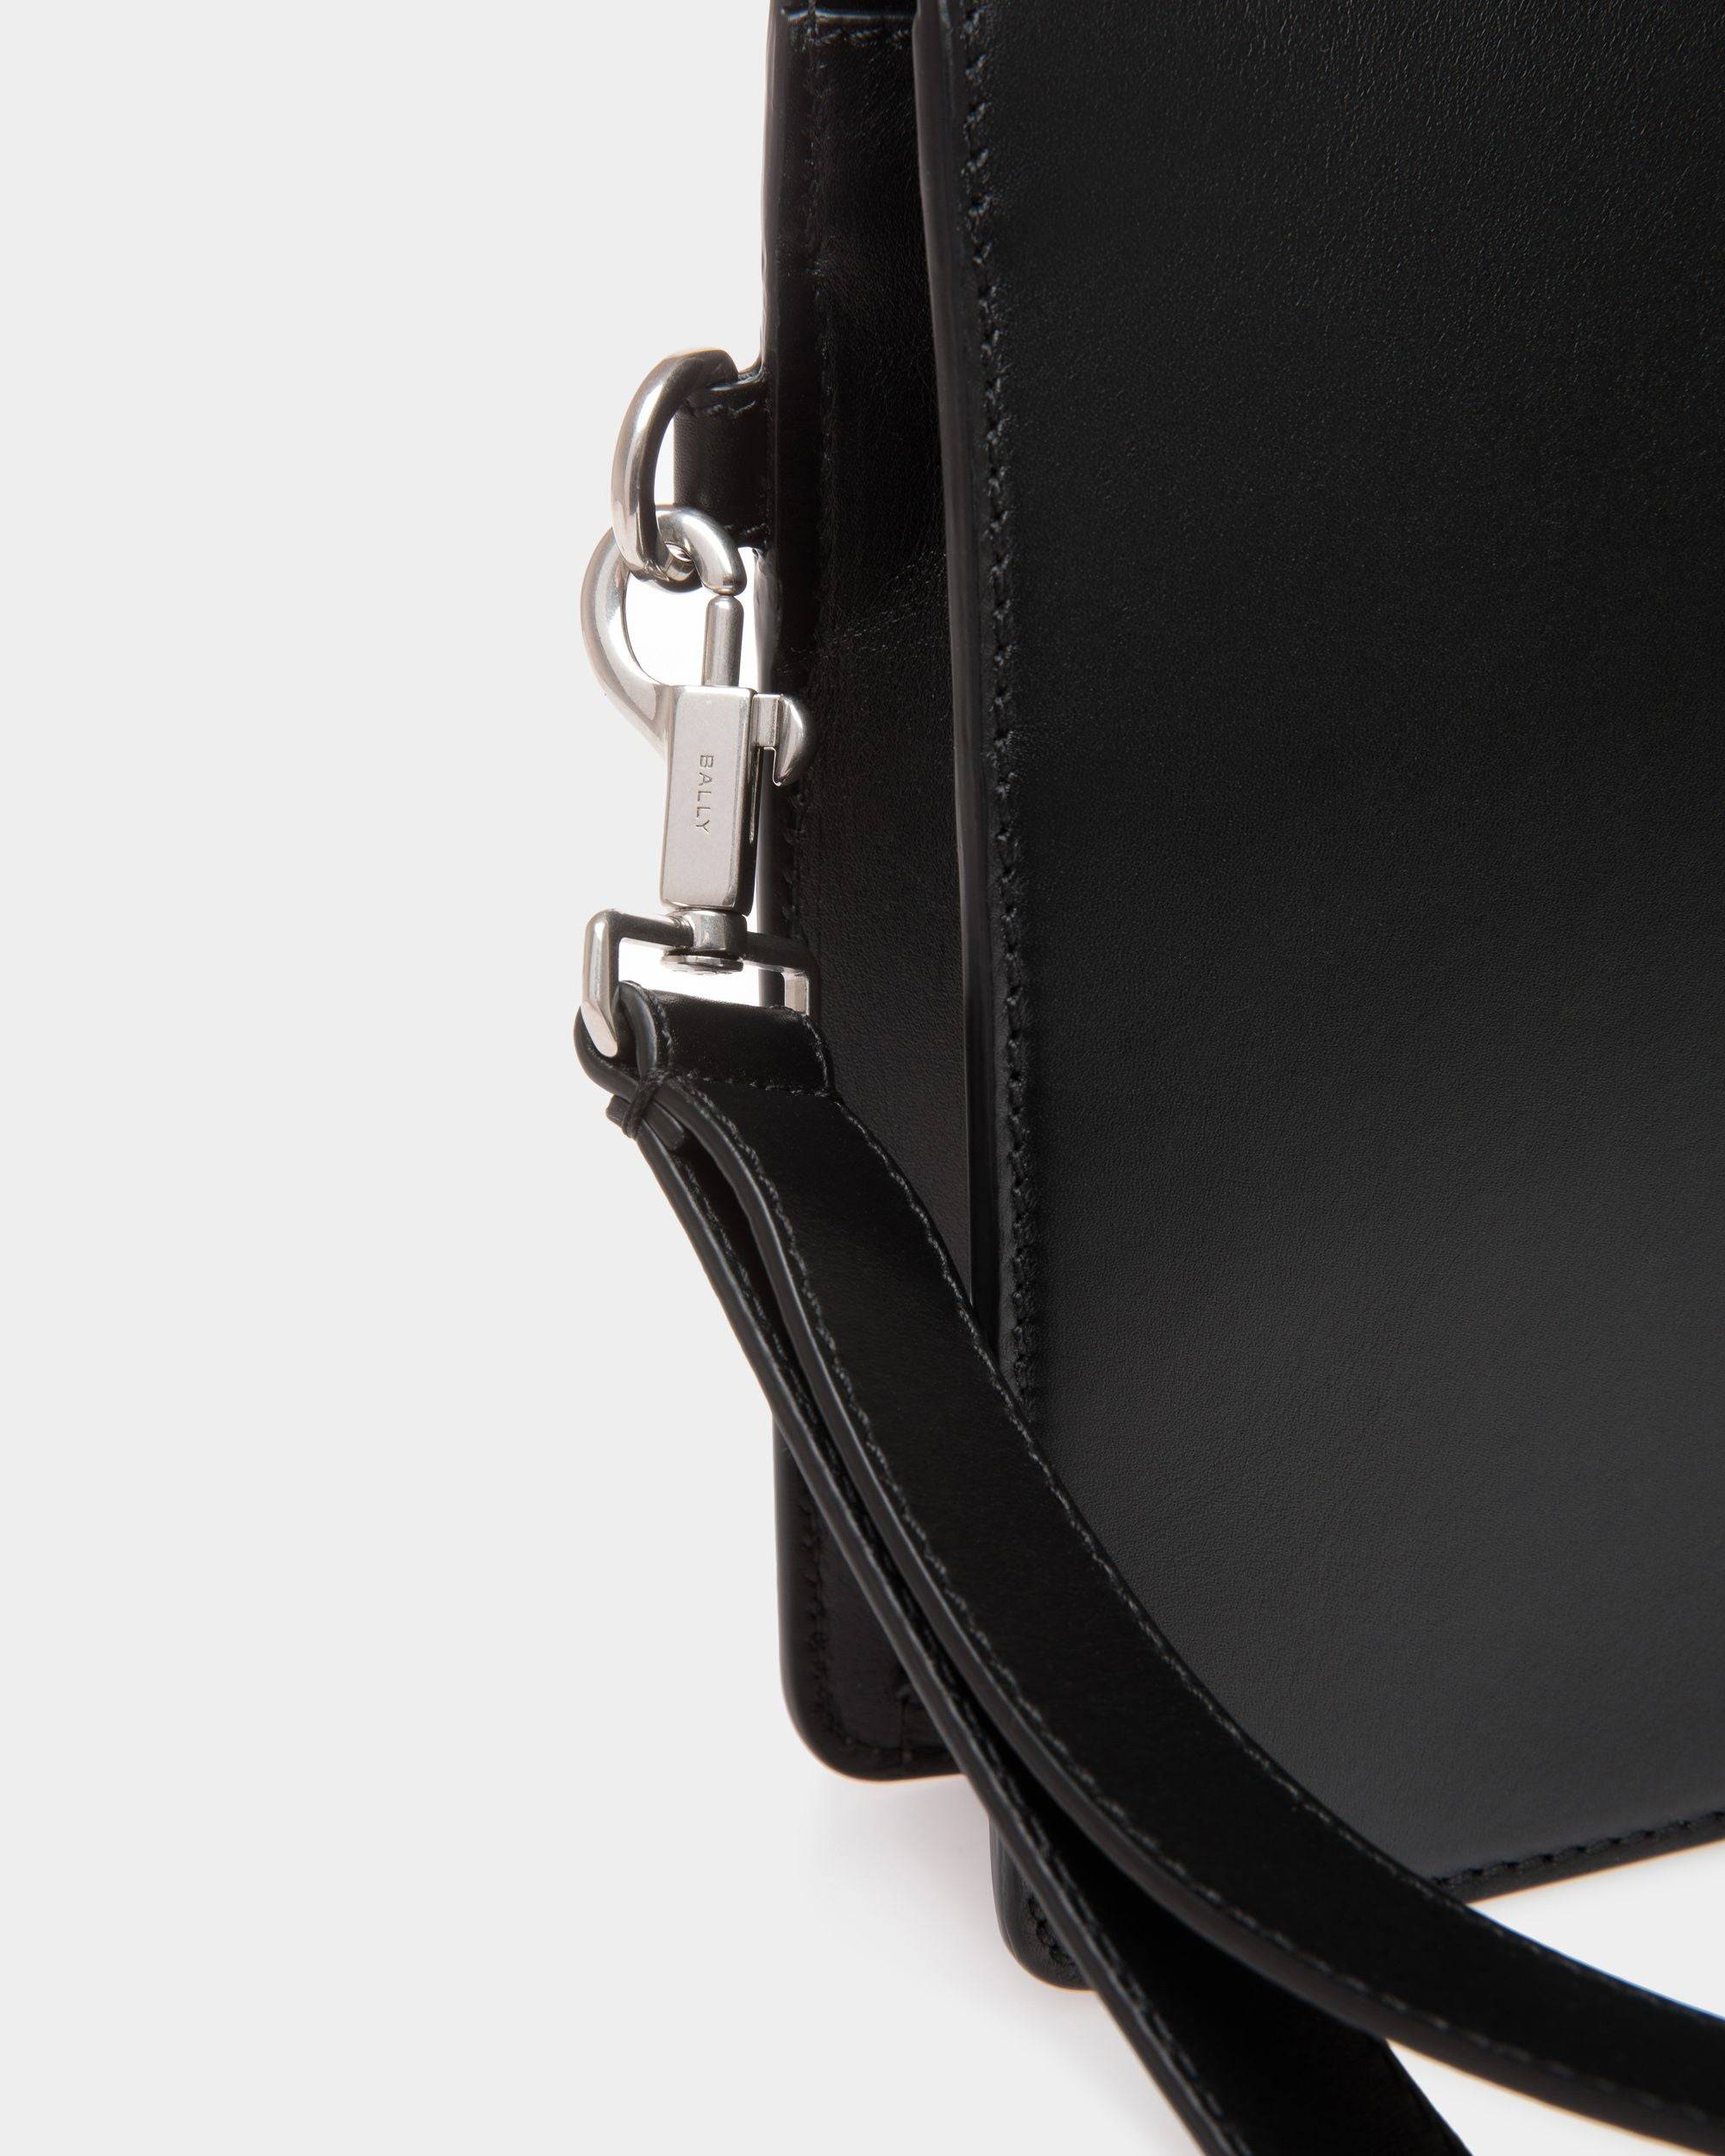 Busy Bally | Men's Pouch in Black Leather | Bally | Still Life Detail